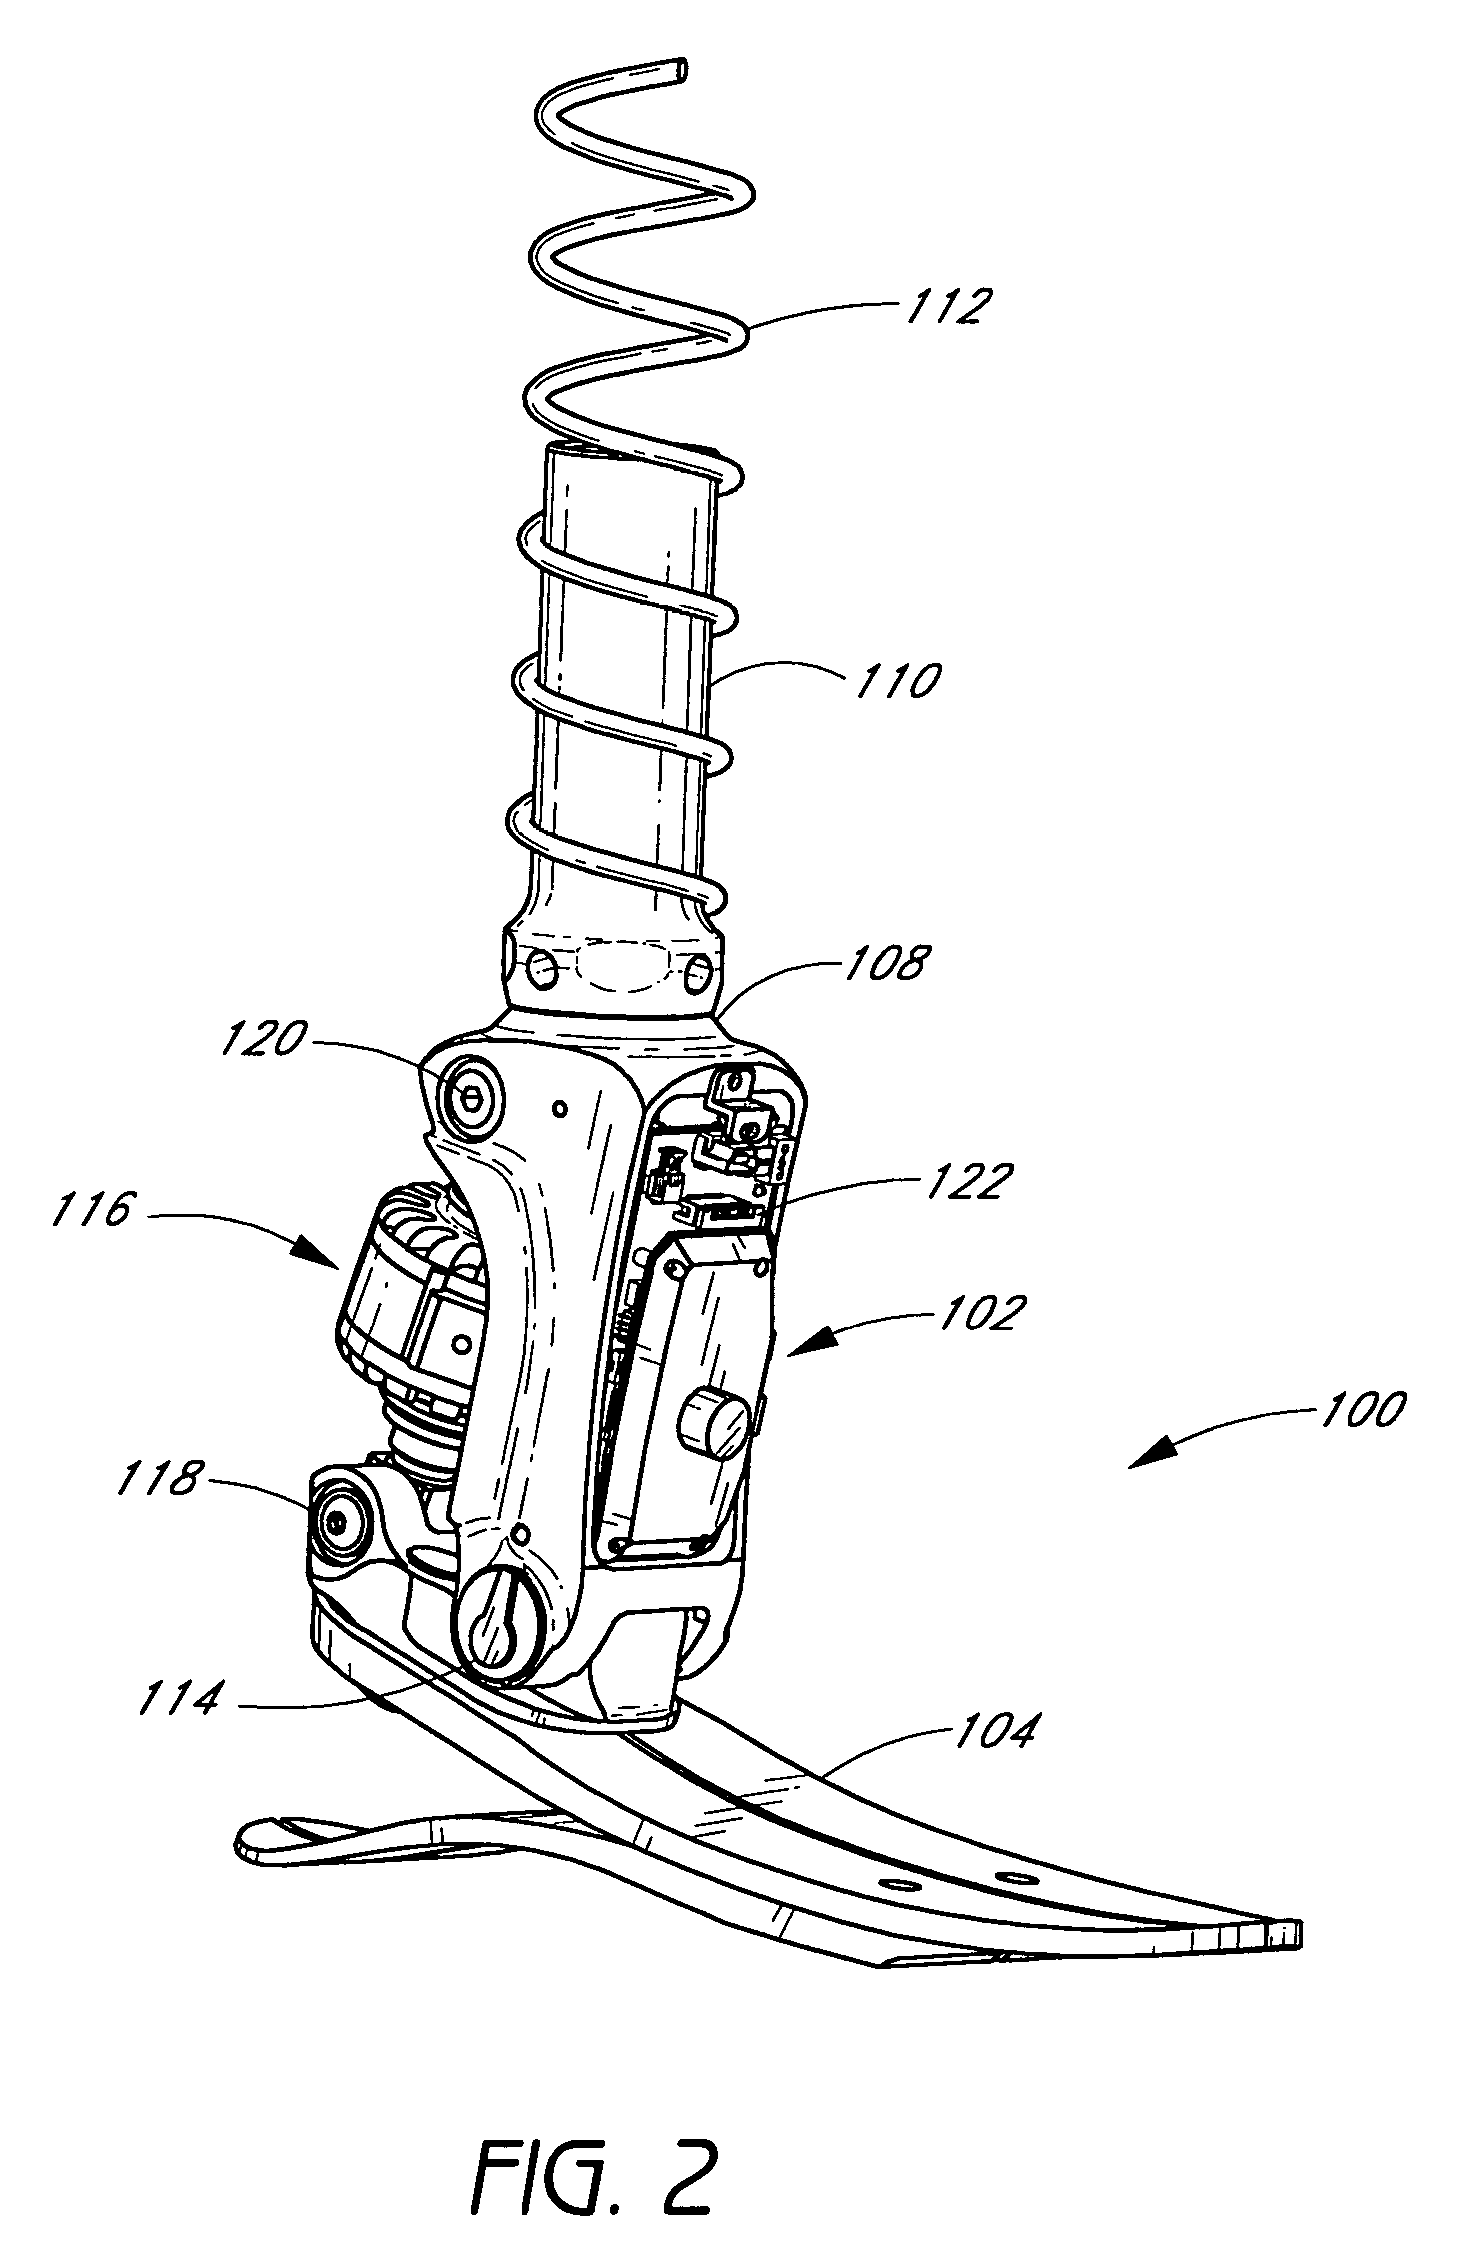 Sensing system and method for motion-controlled foot unit